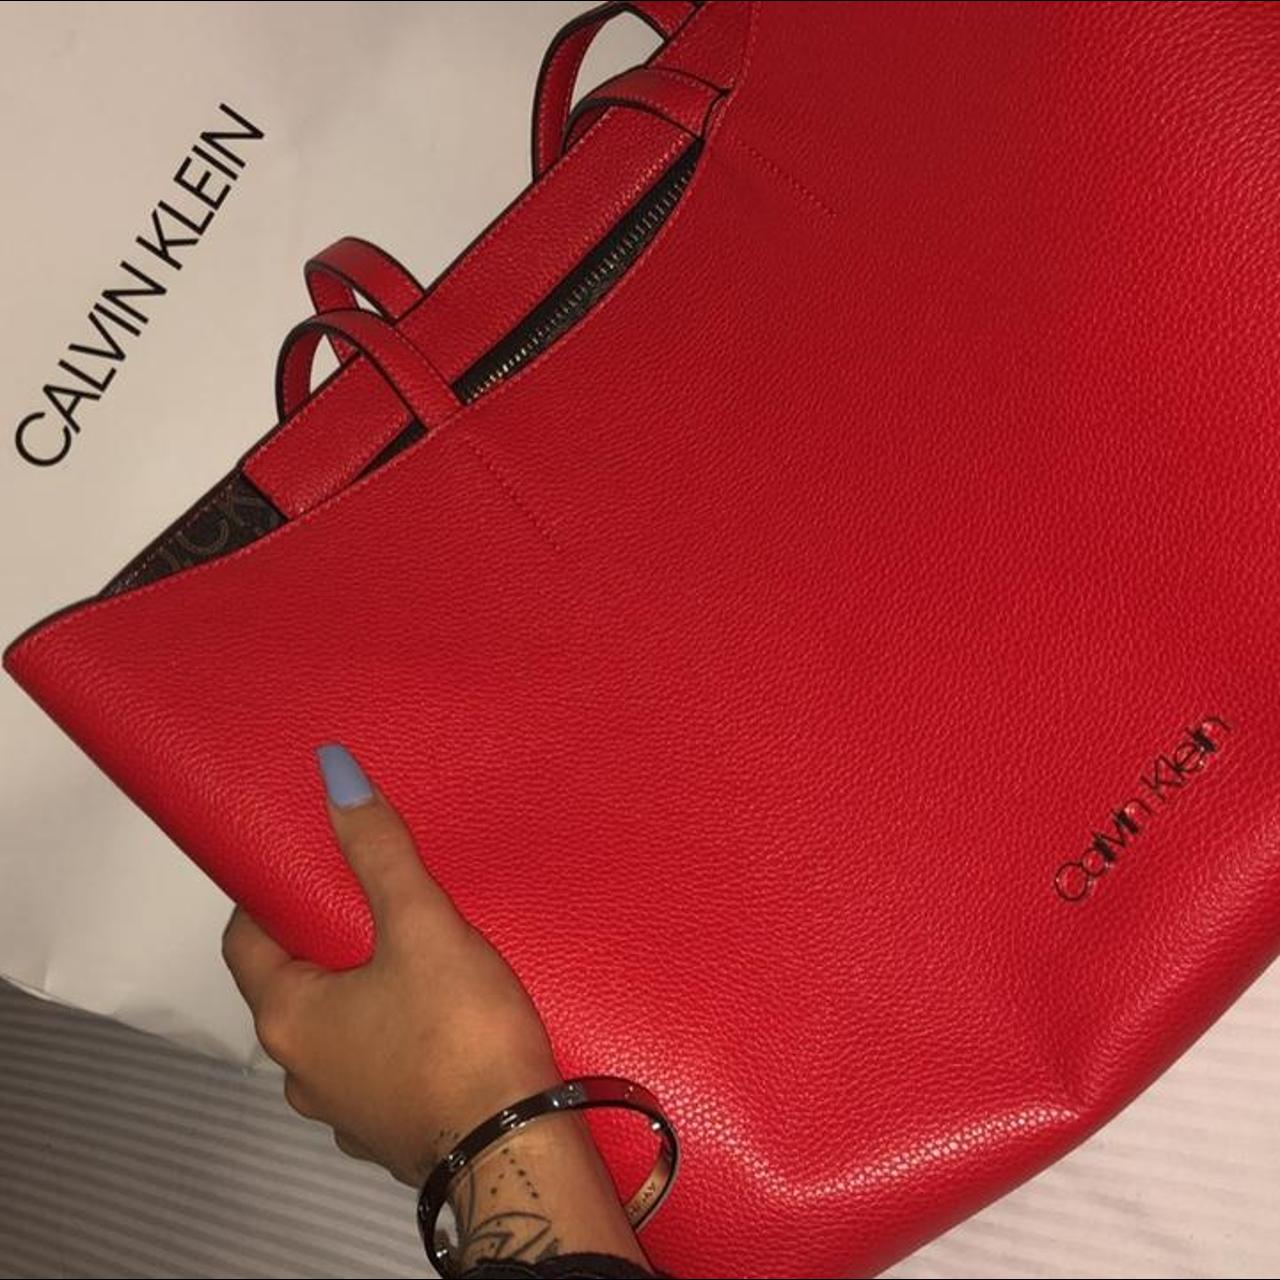 CALVIN KLEIN RED LEATHER CROSSBODY PURSE this - Depop